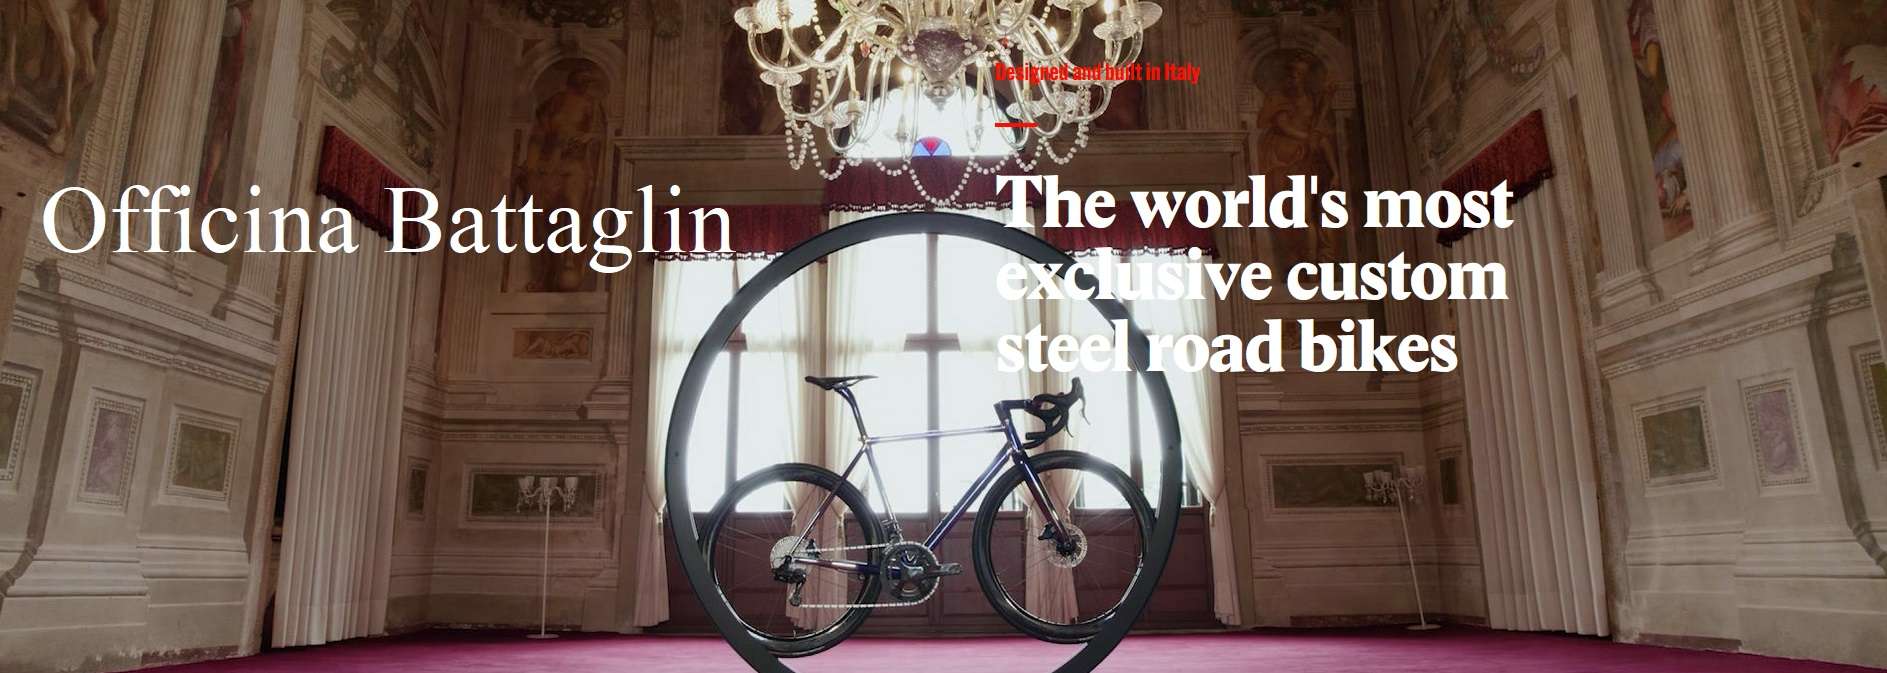 Battaglin: The World's Most Exclusive Custom Road Bikes, Designed and Built in Italy